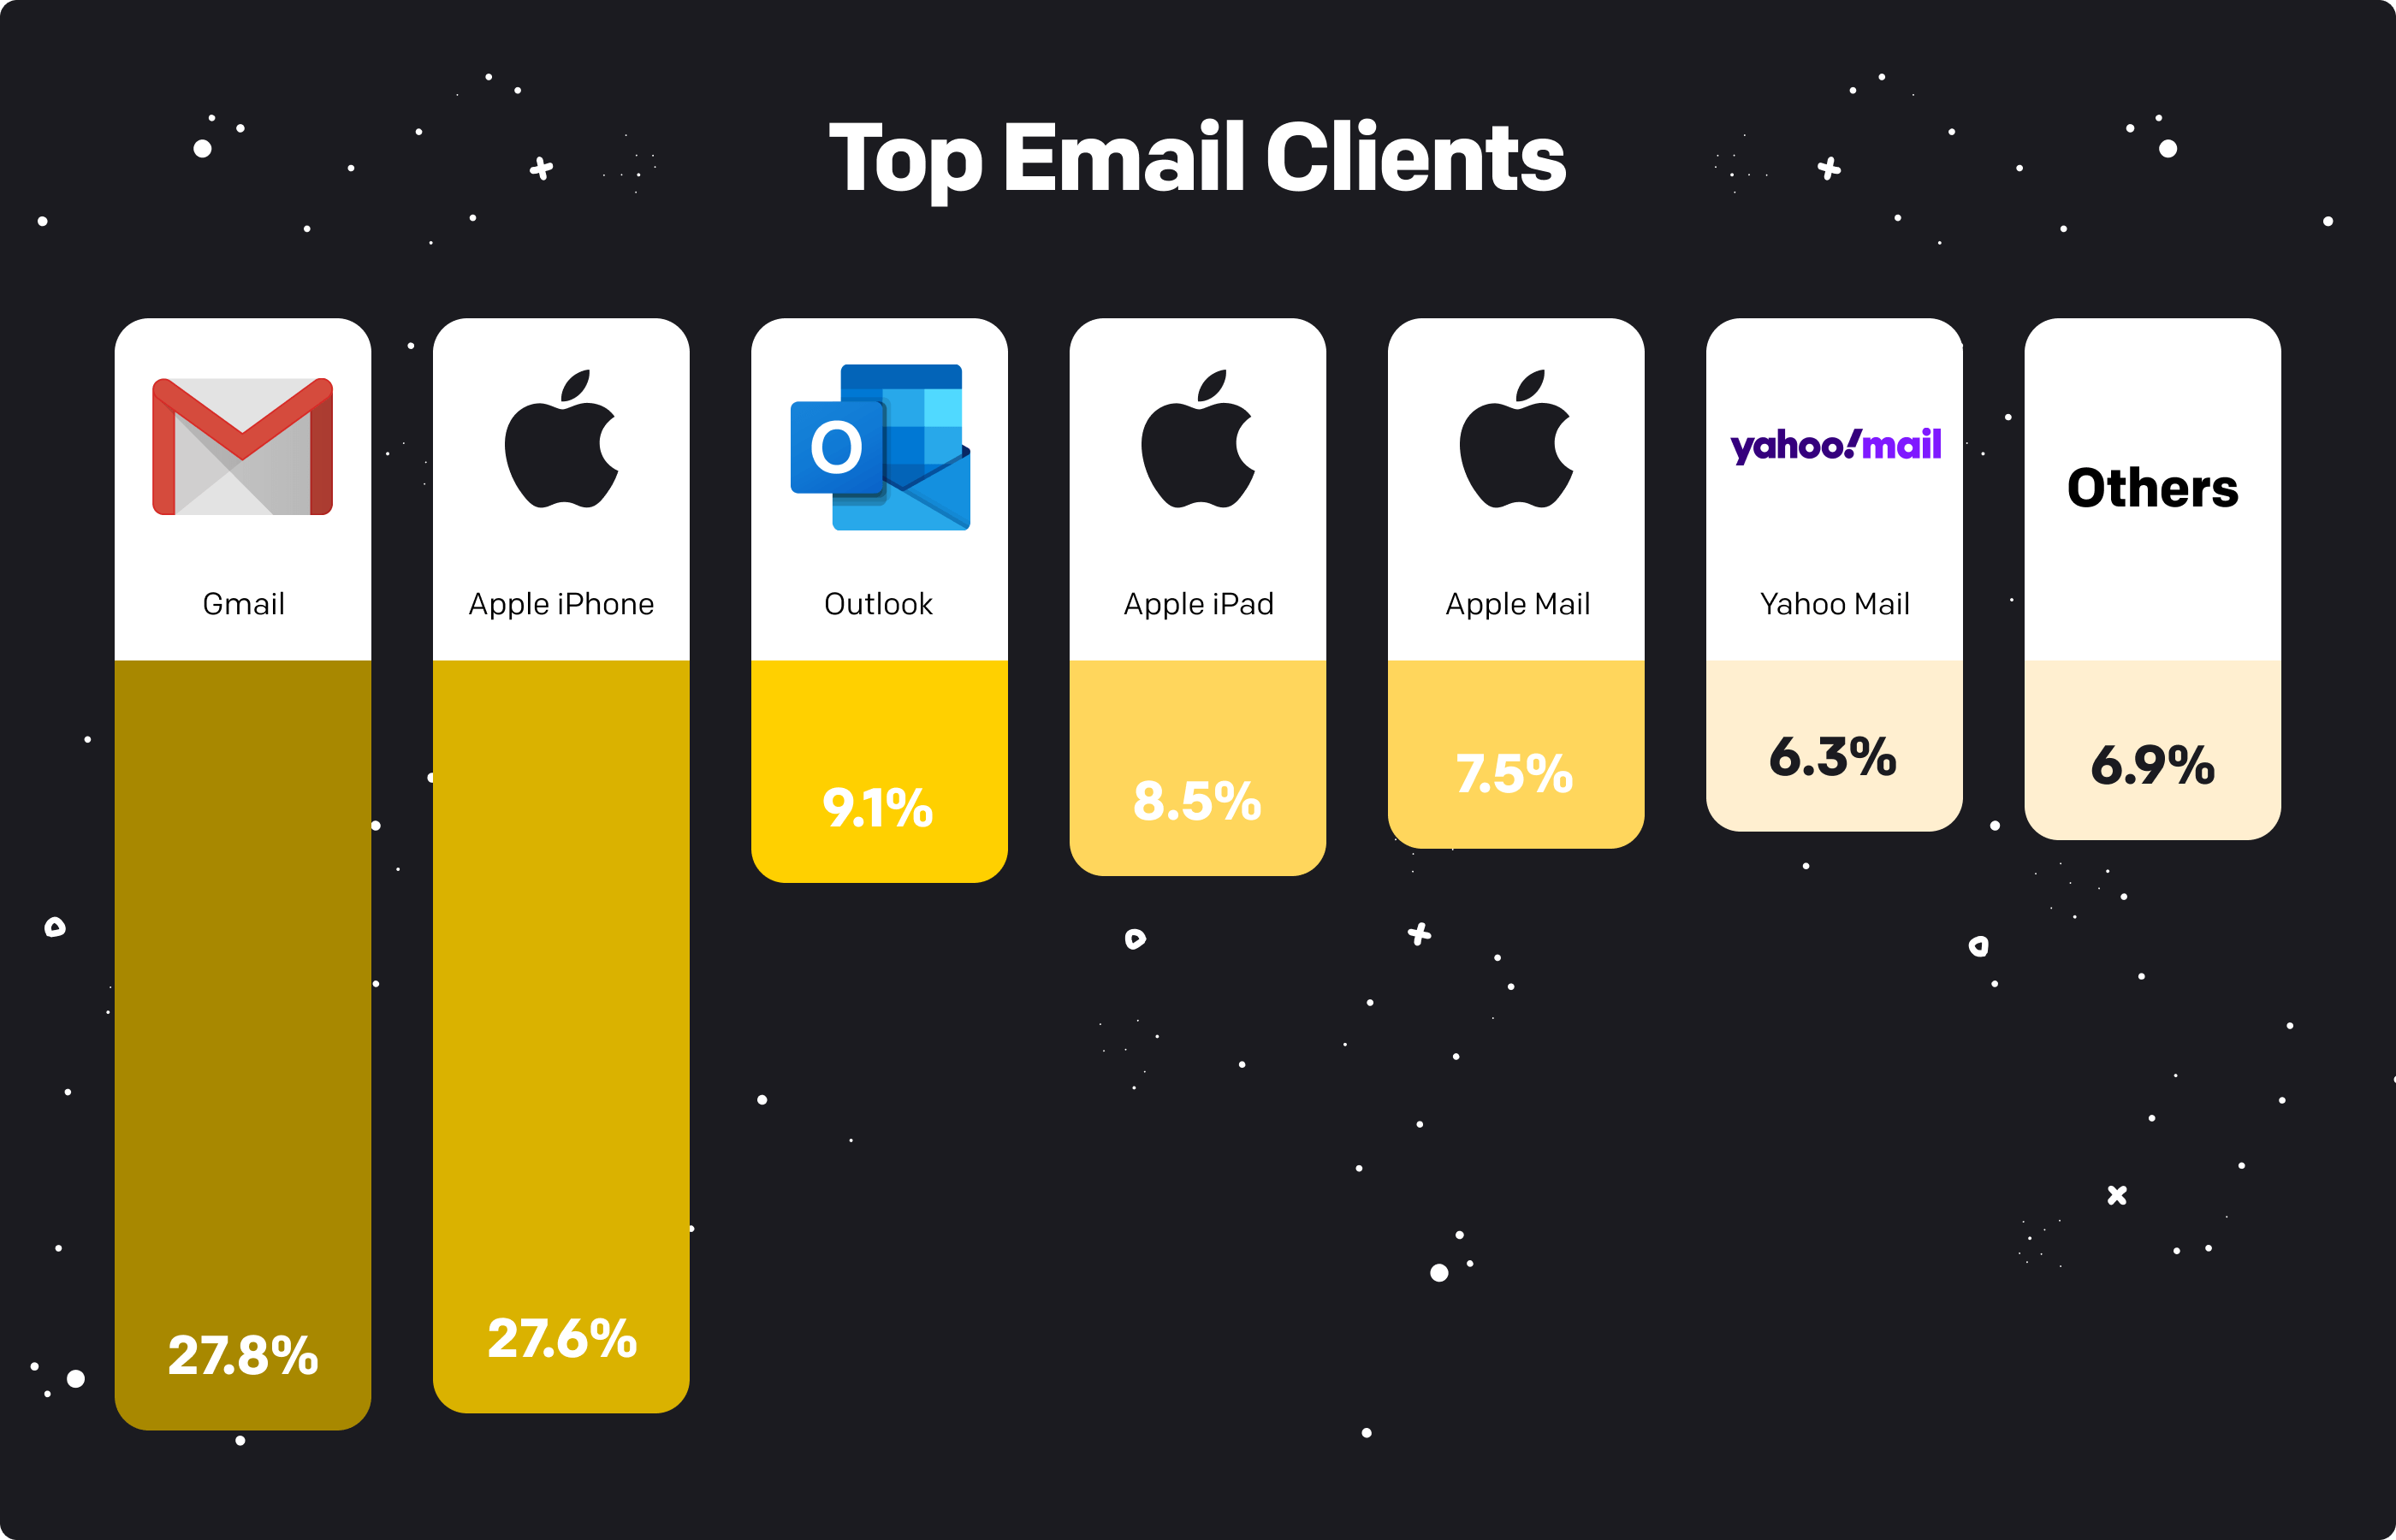 Top email clients.